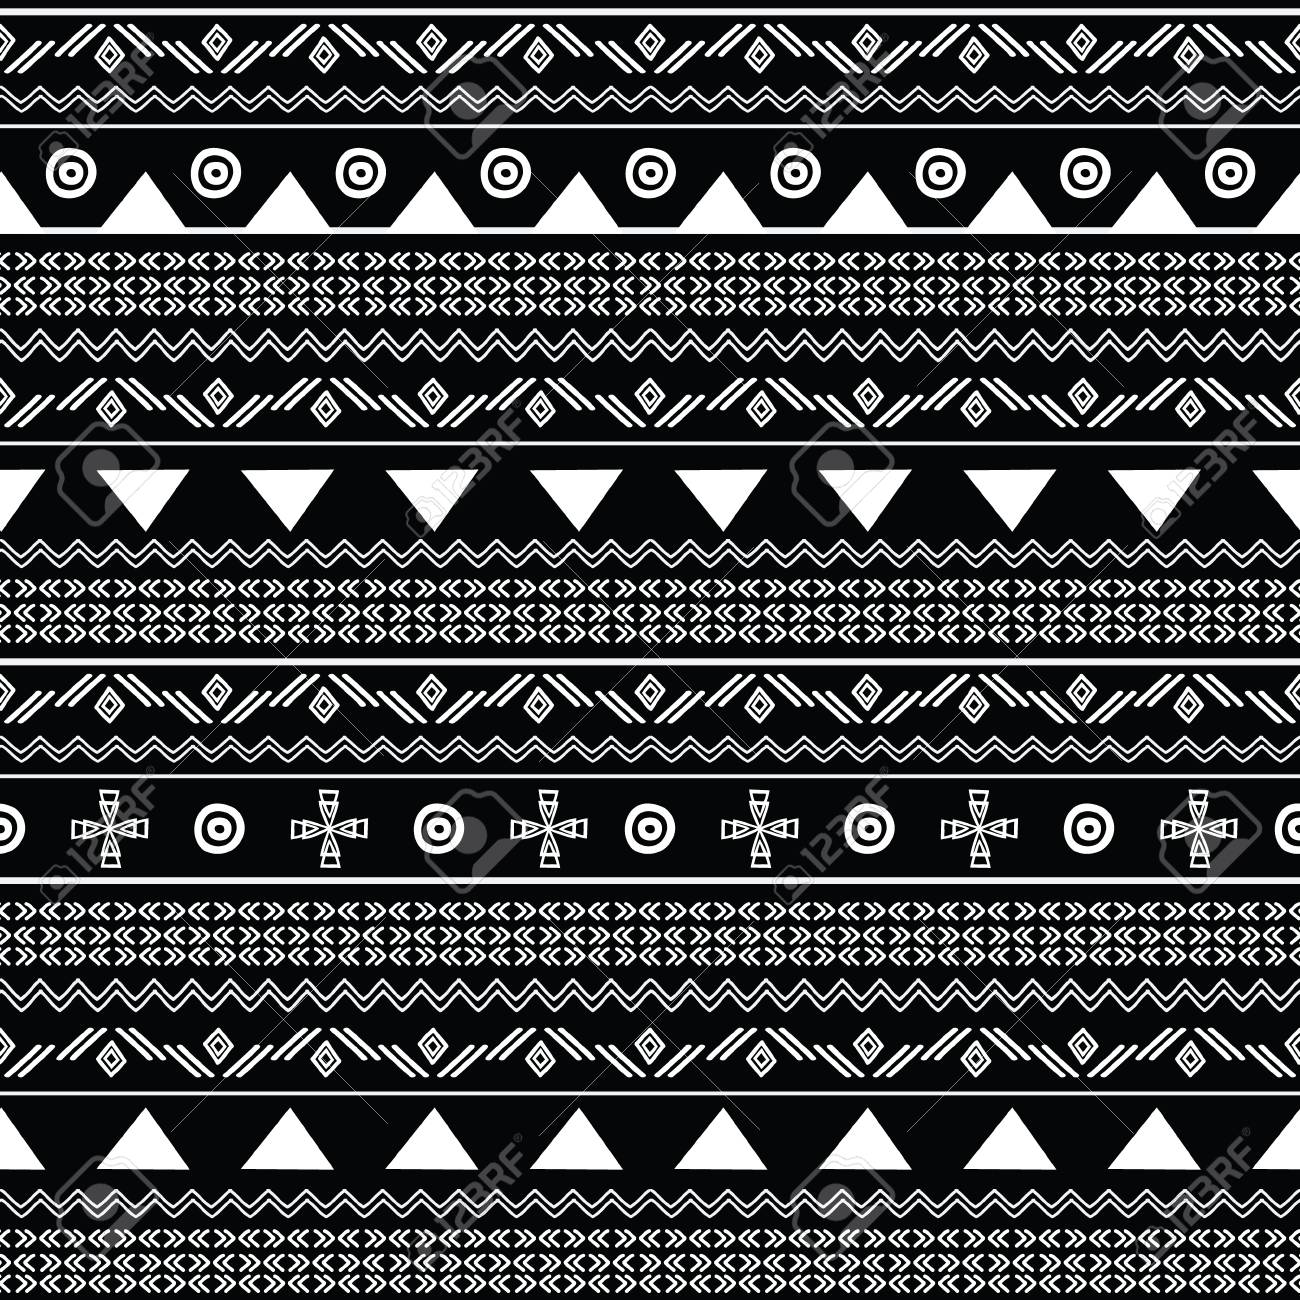 Tribal Black And White Seamless Repeat Pattern Great For Folk 1300x1300